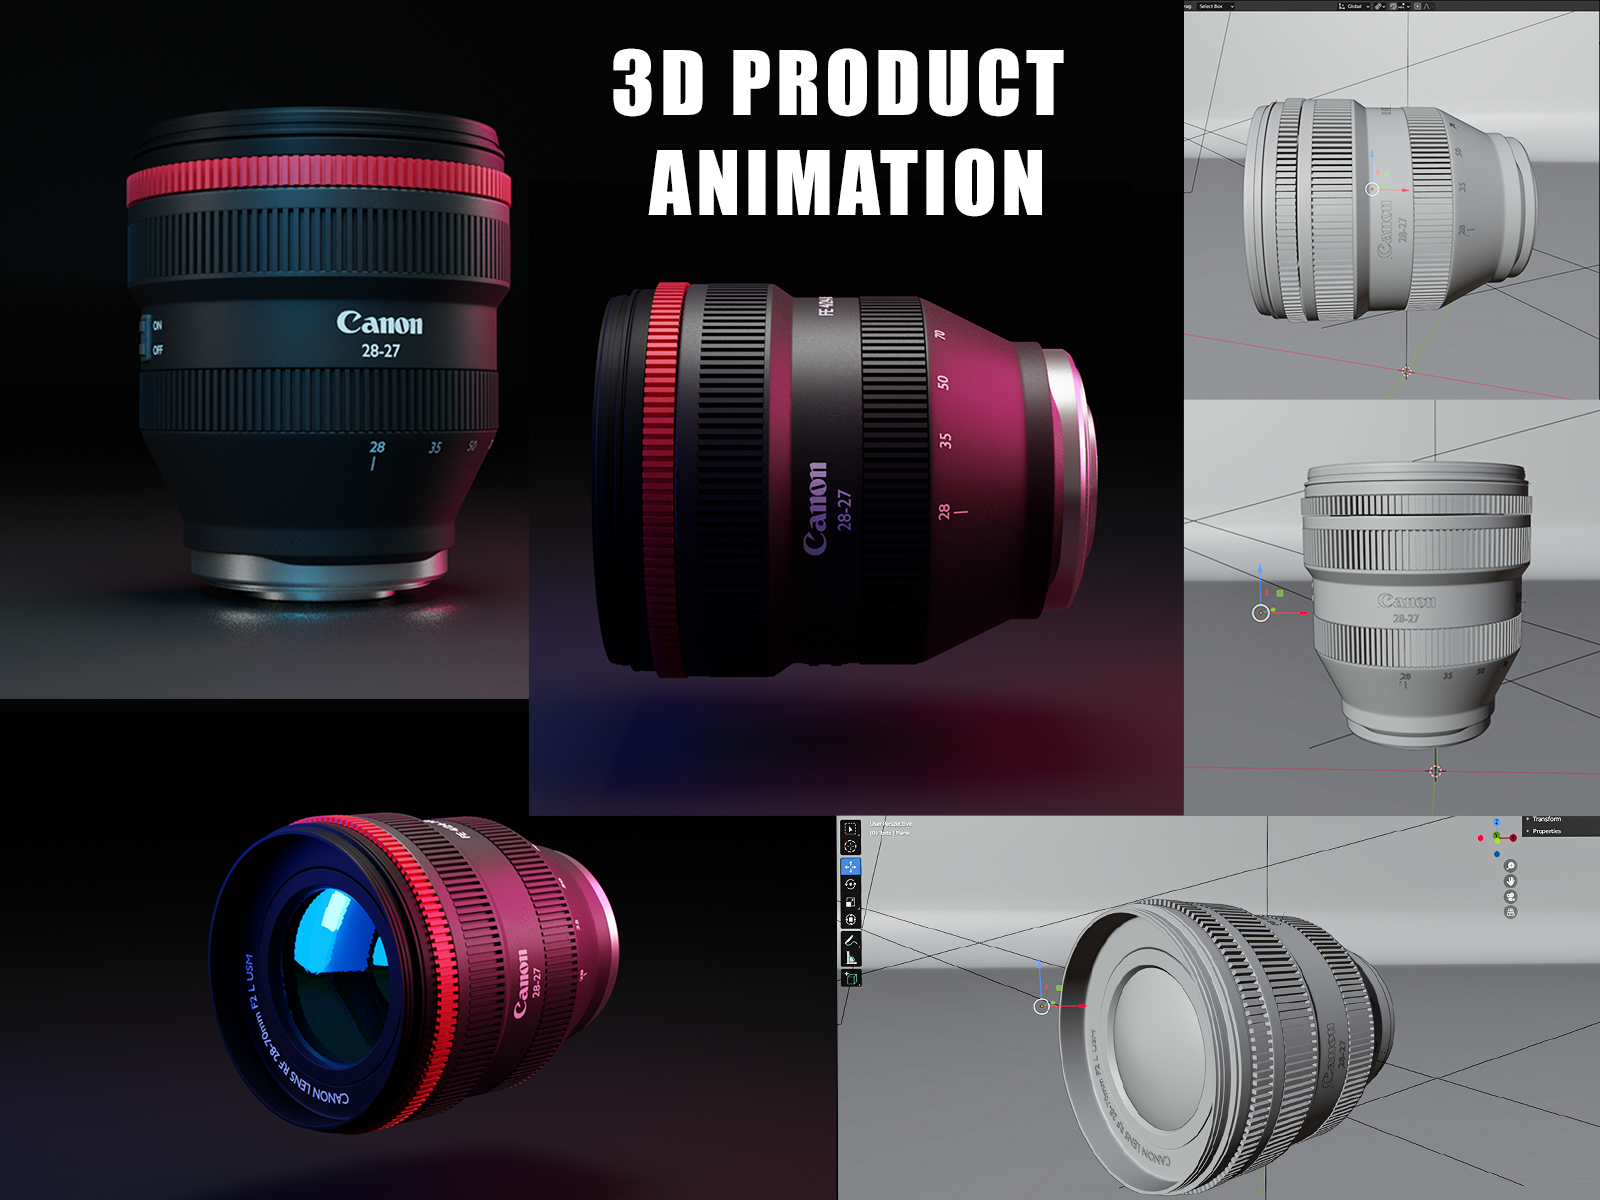 3D MODEL & 3D PRODUCT ANIMATION of CANON LENS created by BLENDER by Md. Nasim Saba